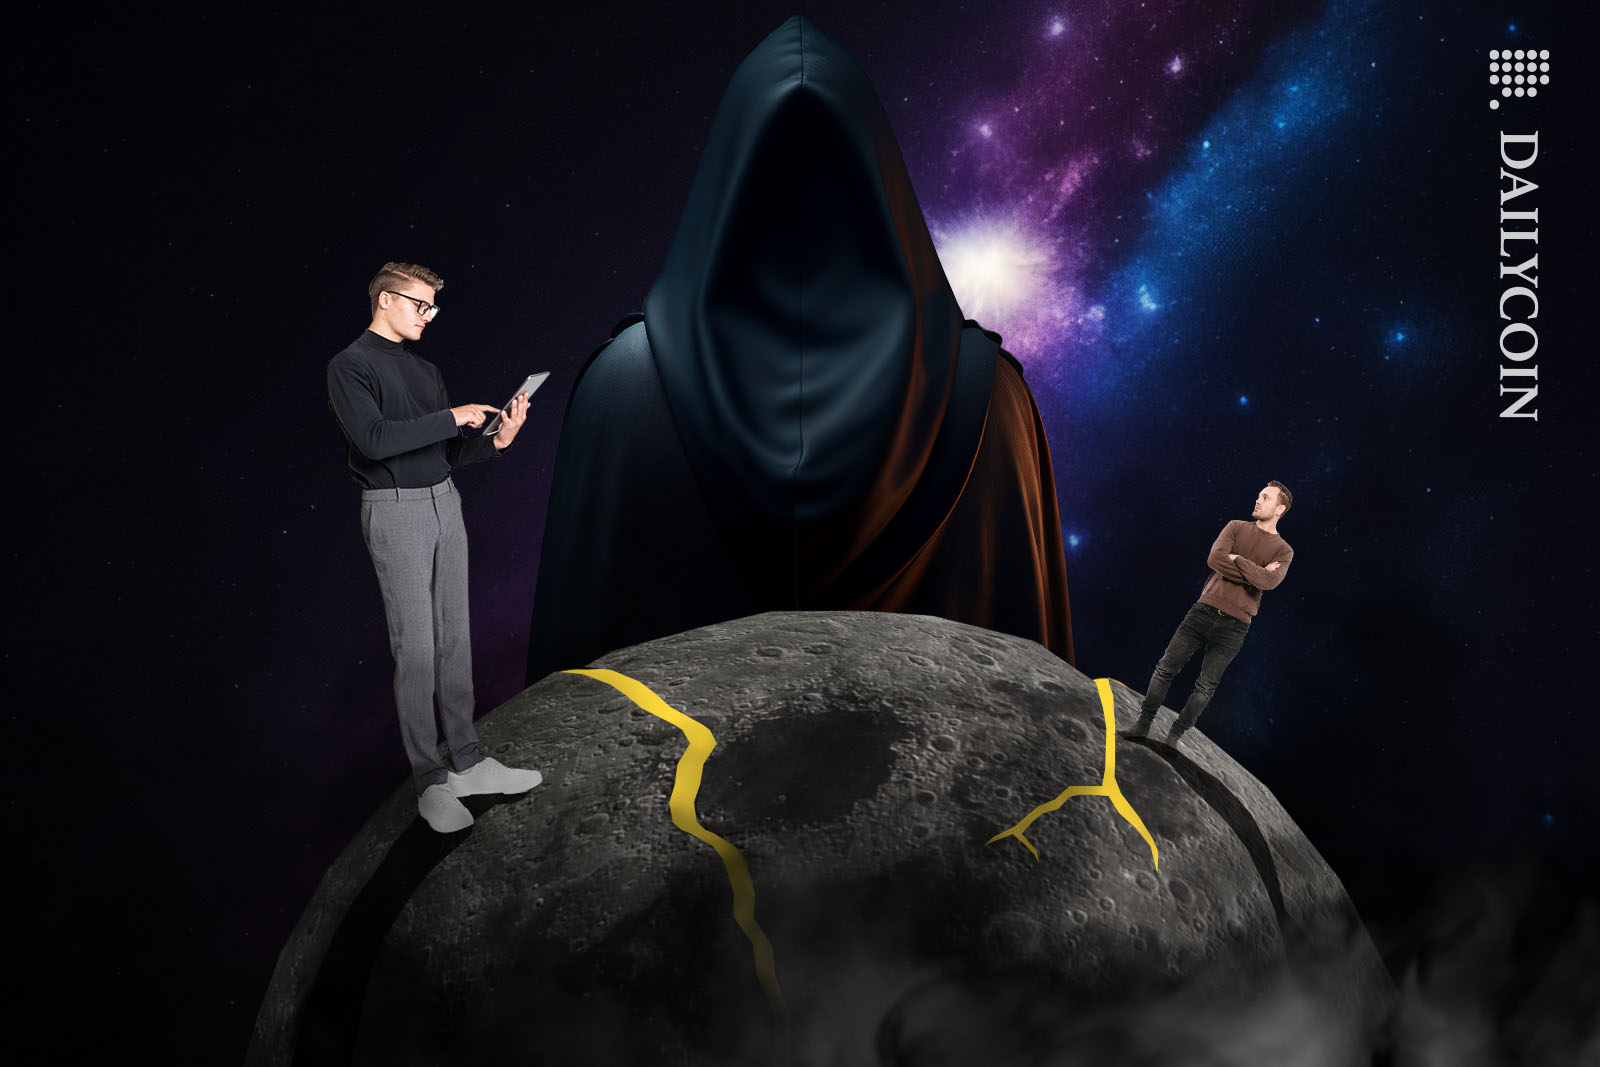 Two developers on moon, analyzing a shady hooded figure.